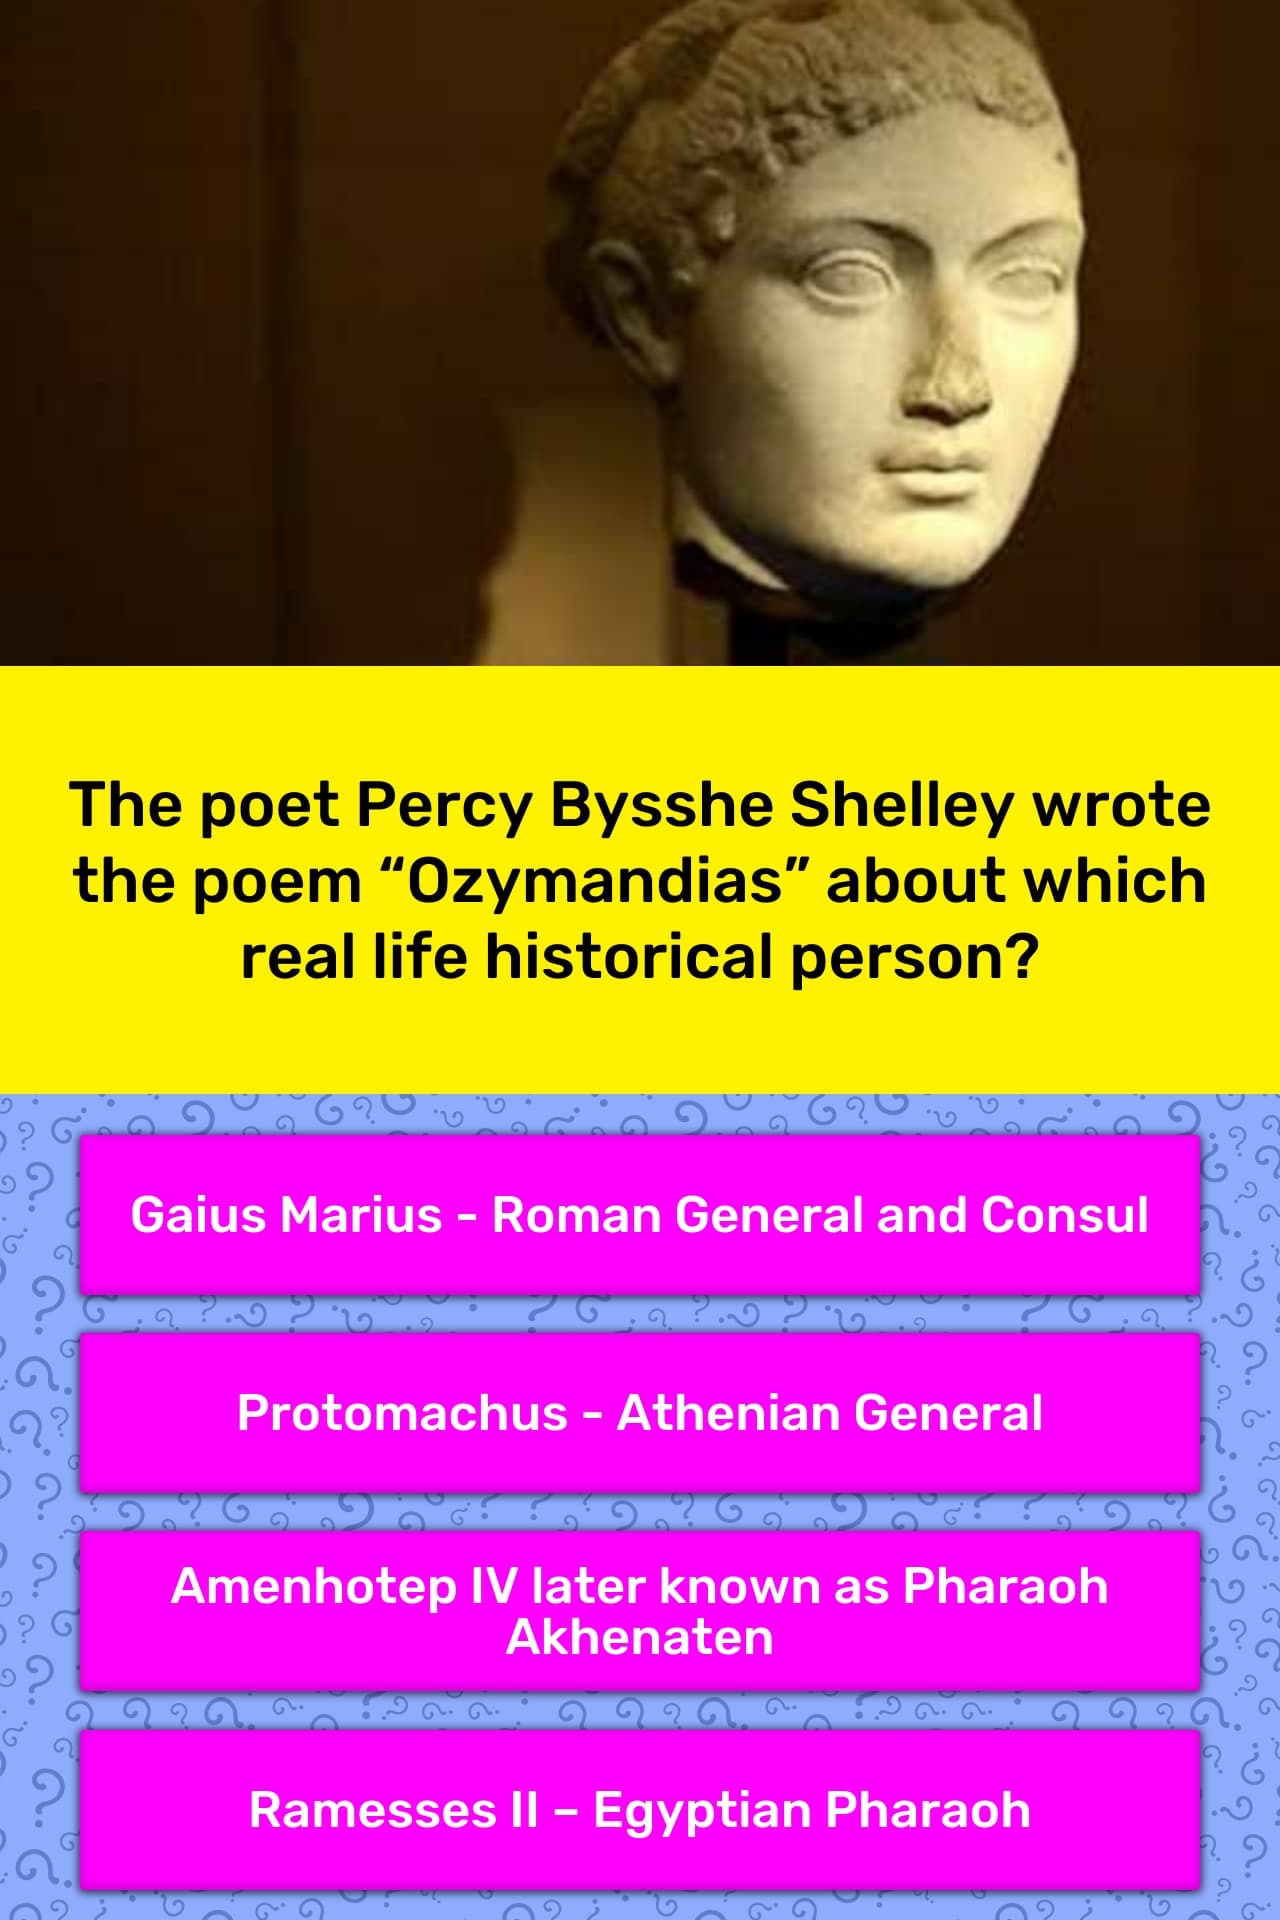 ozymandias by percy bysshe shelley meaning